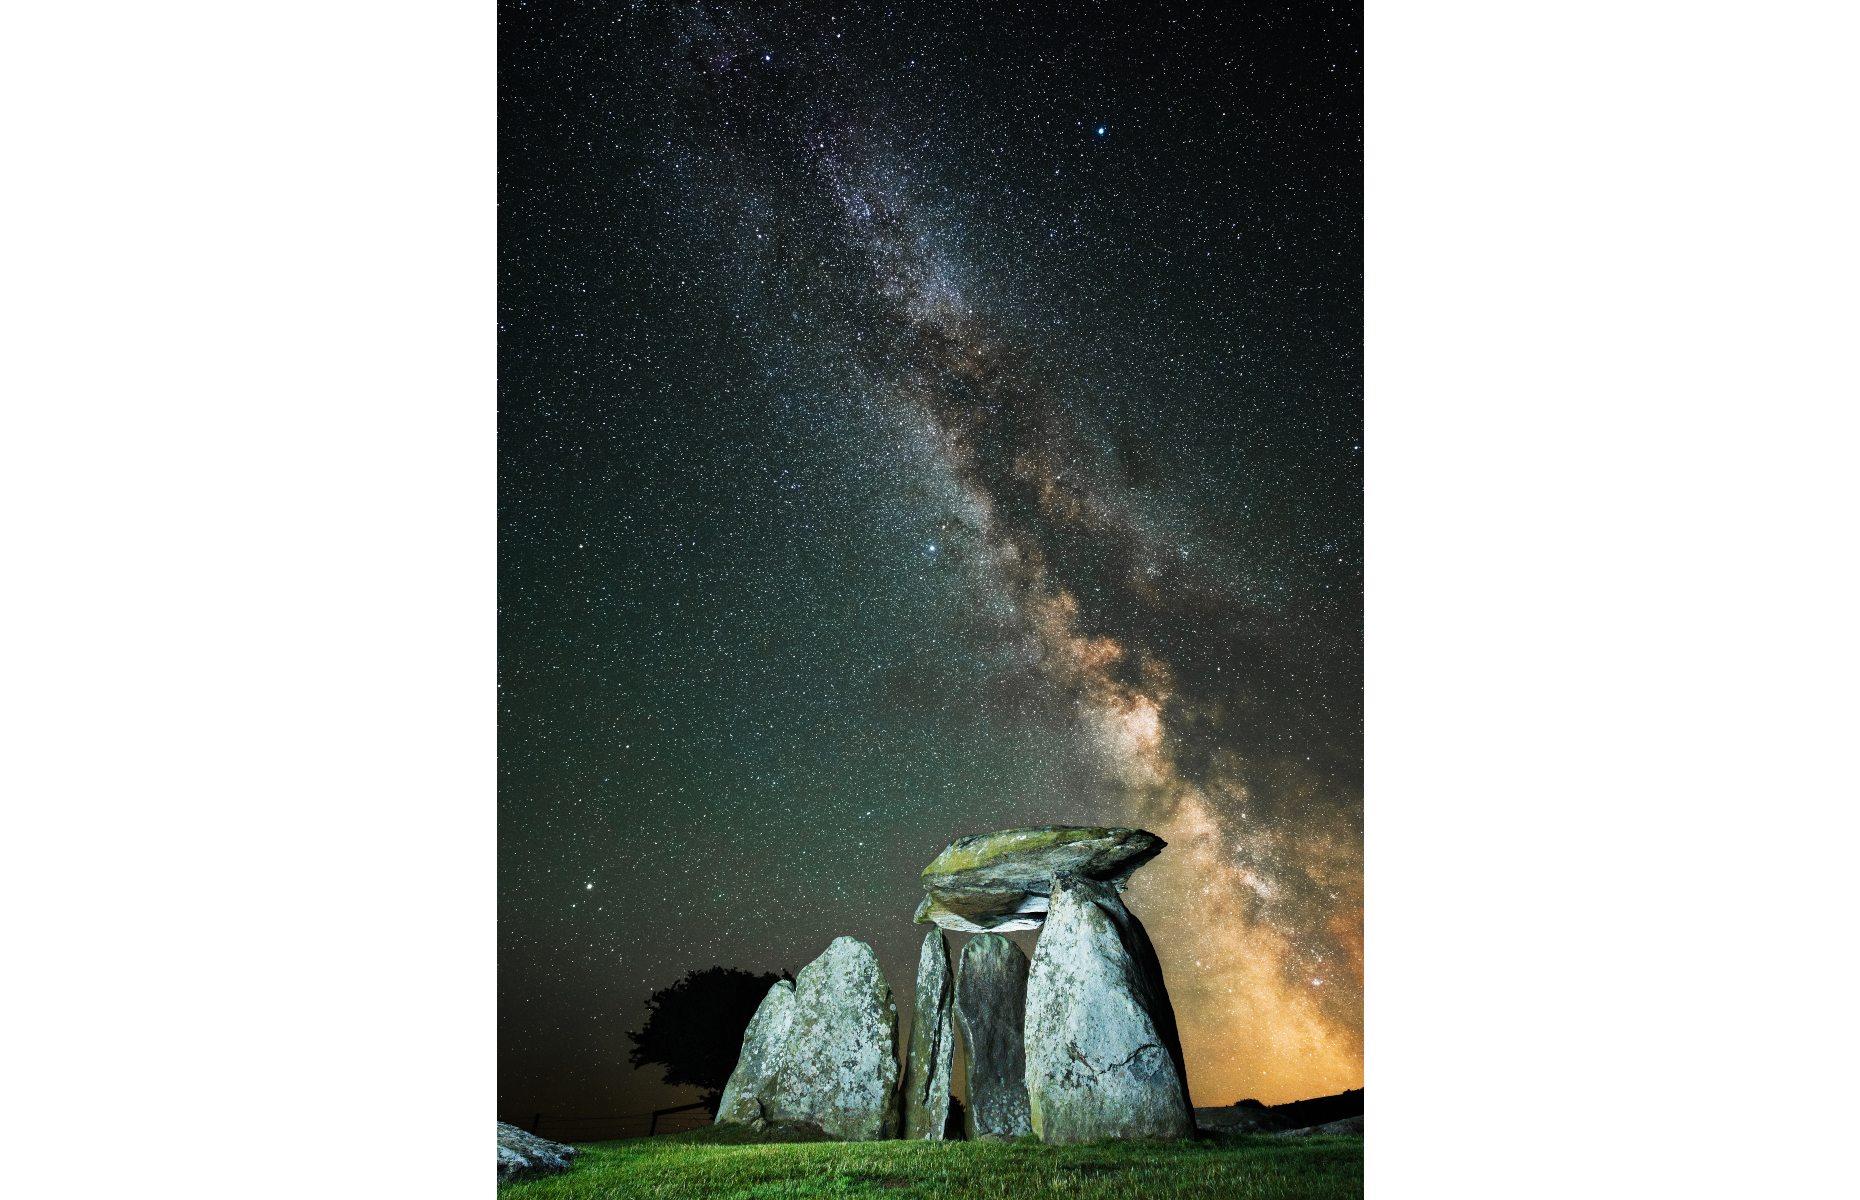 Shown here beneath a starlit sky, Pentre Ifan is a Neolithic burial site in the foothills of the Preseli Hills in North Pembrokeshire – it's known for being one of the best-preserved sites from this period in the UK. Photographer Chris Bestall said that getting this shot was an especially proud moment, as it was his first time capturing the Milky Way on camera.